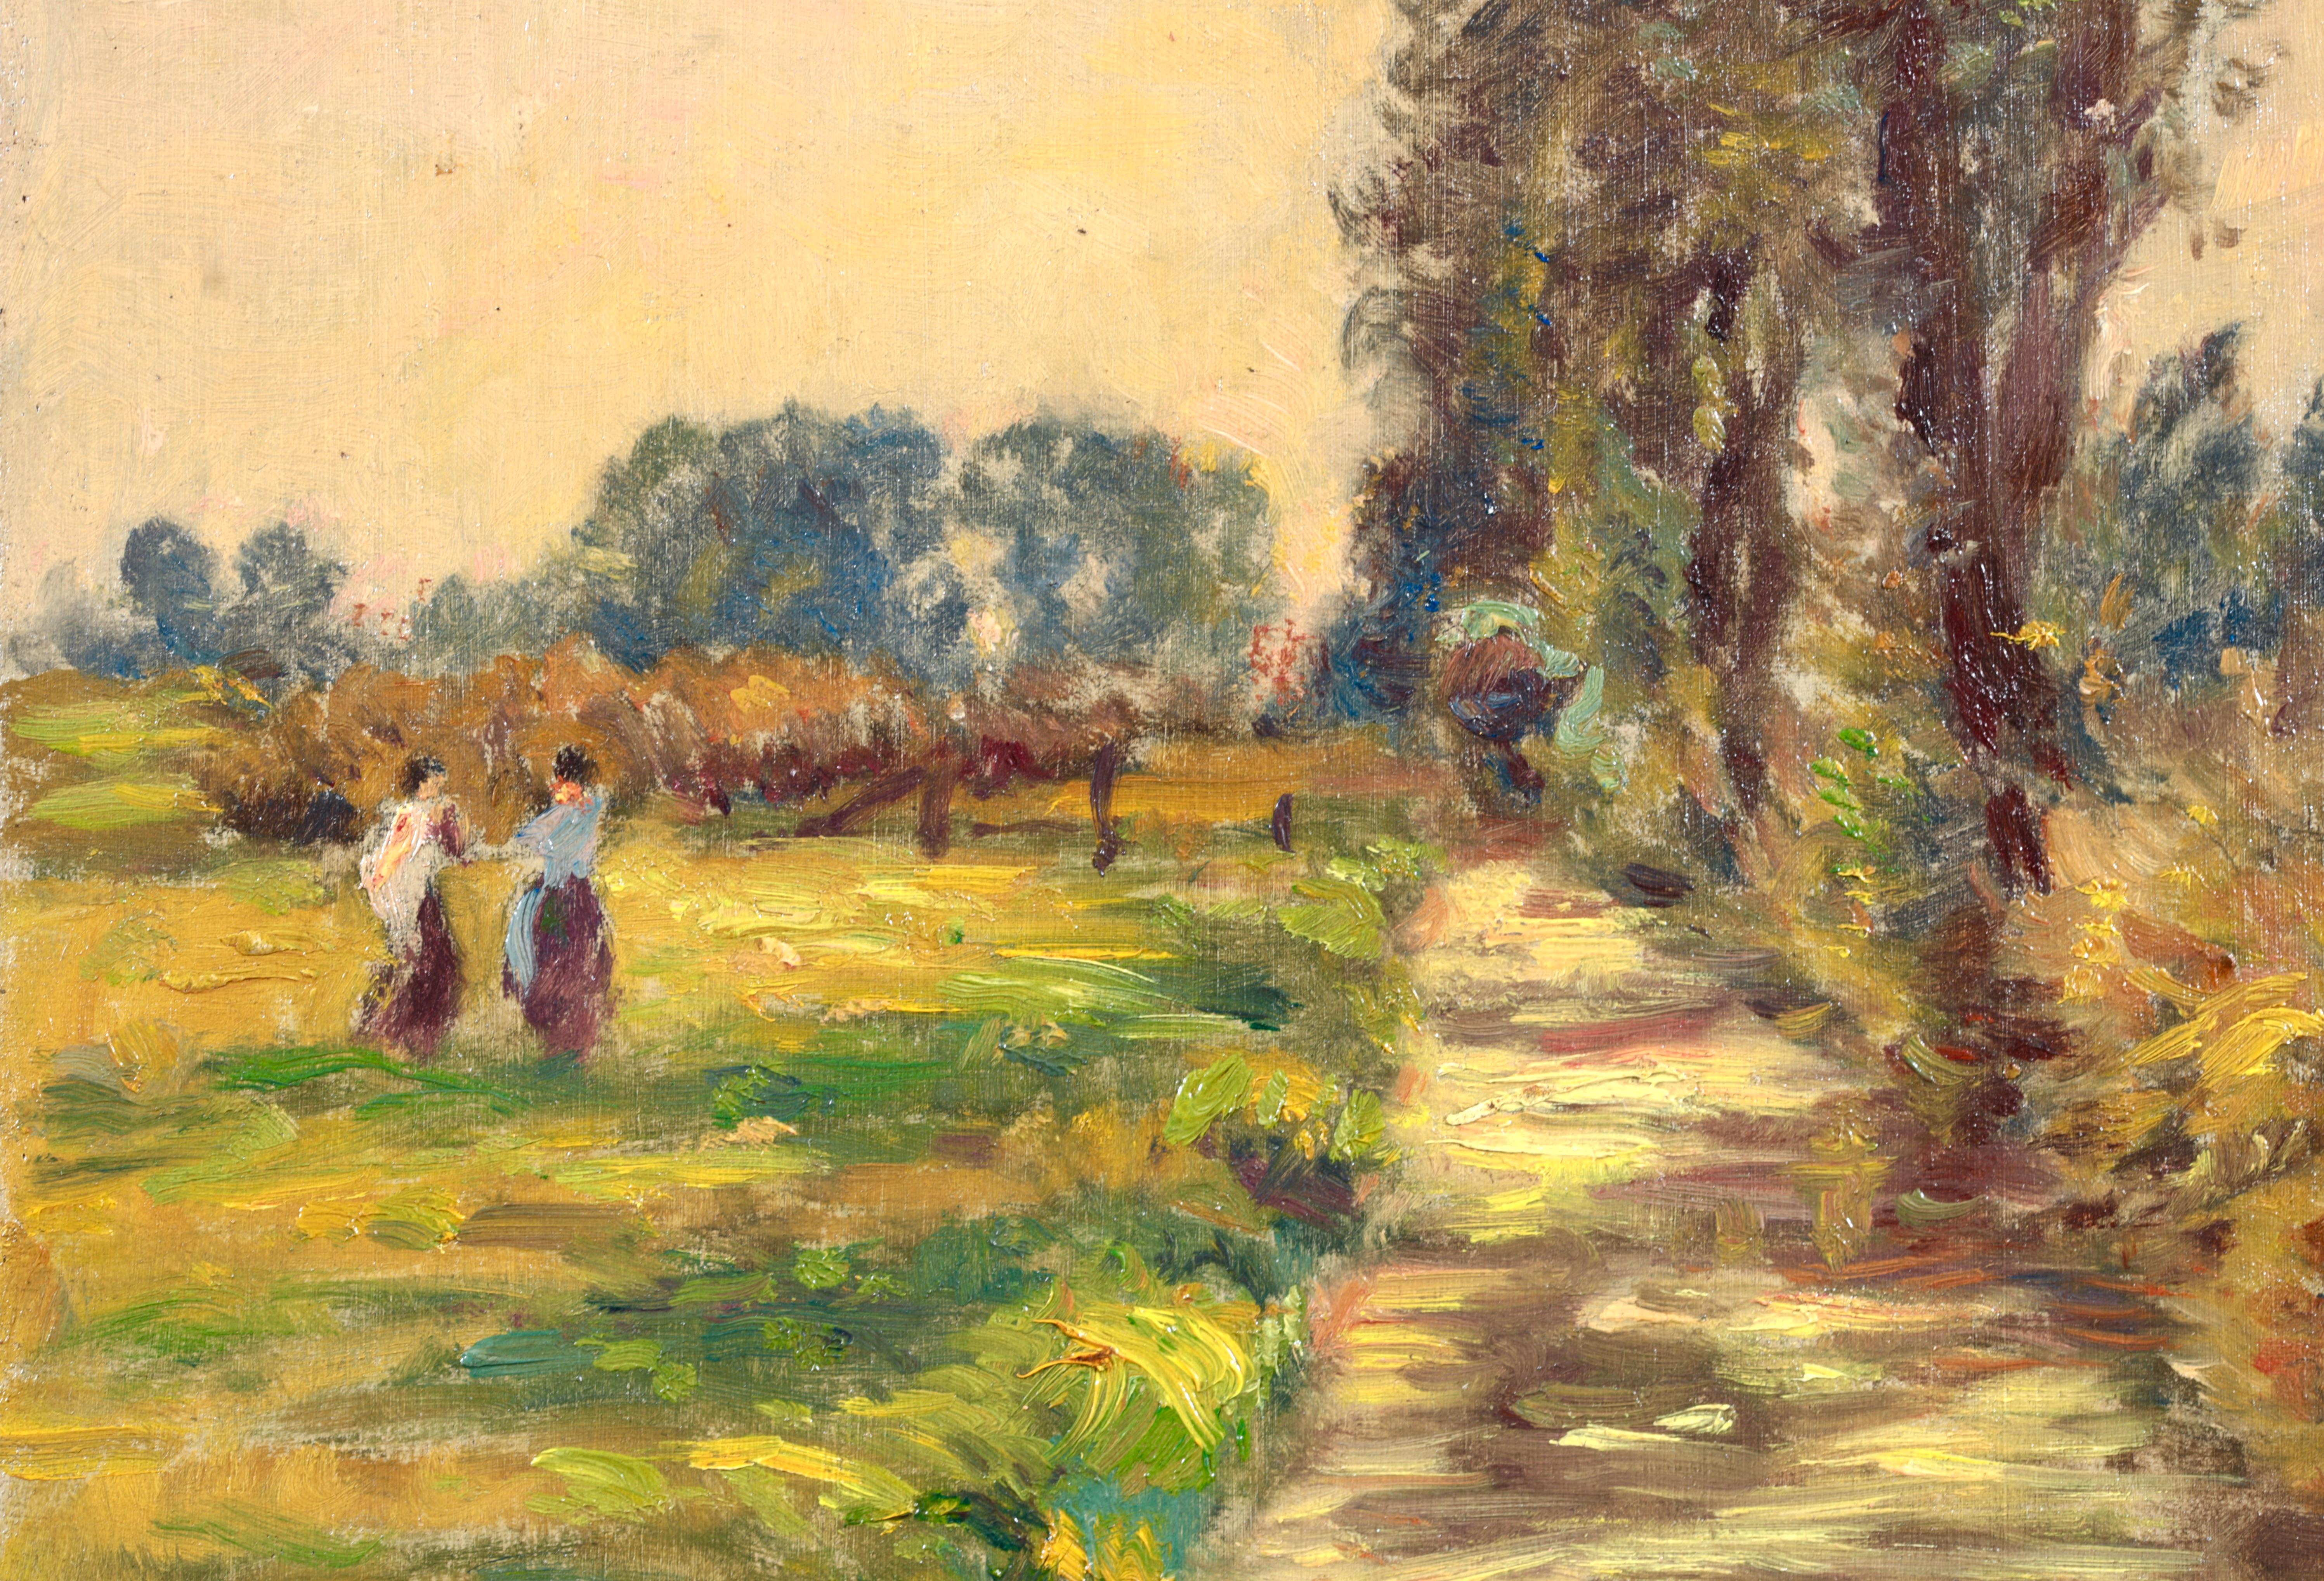 Signed and dated oil on panel landscape by French impressionist painter Henri Duhem. The work depicts two women walking on a green grassy bank by a stream in a summer landscape.

Signature:
Signed lower left and dated 1926